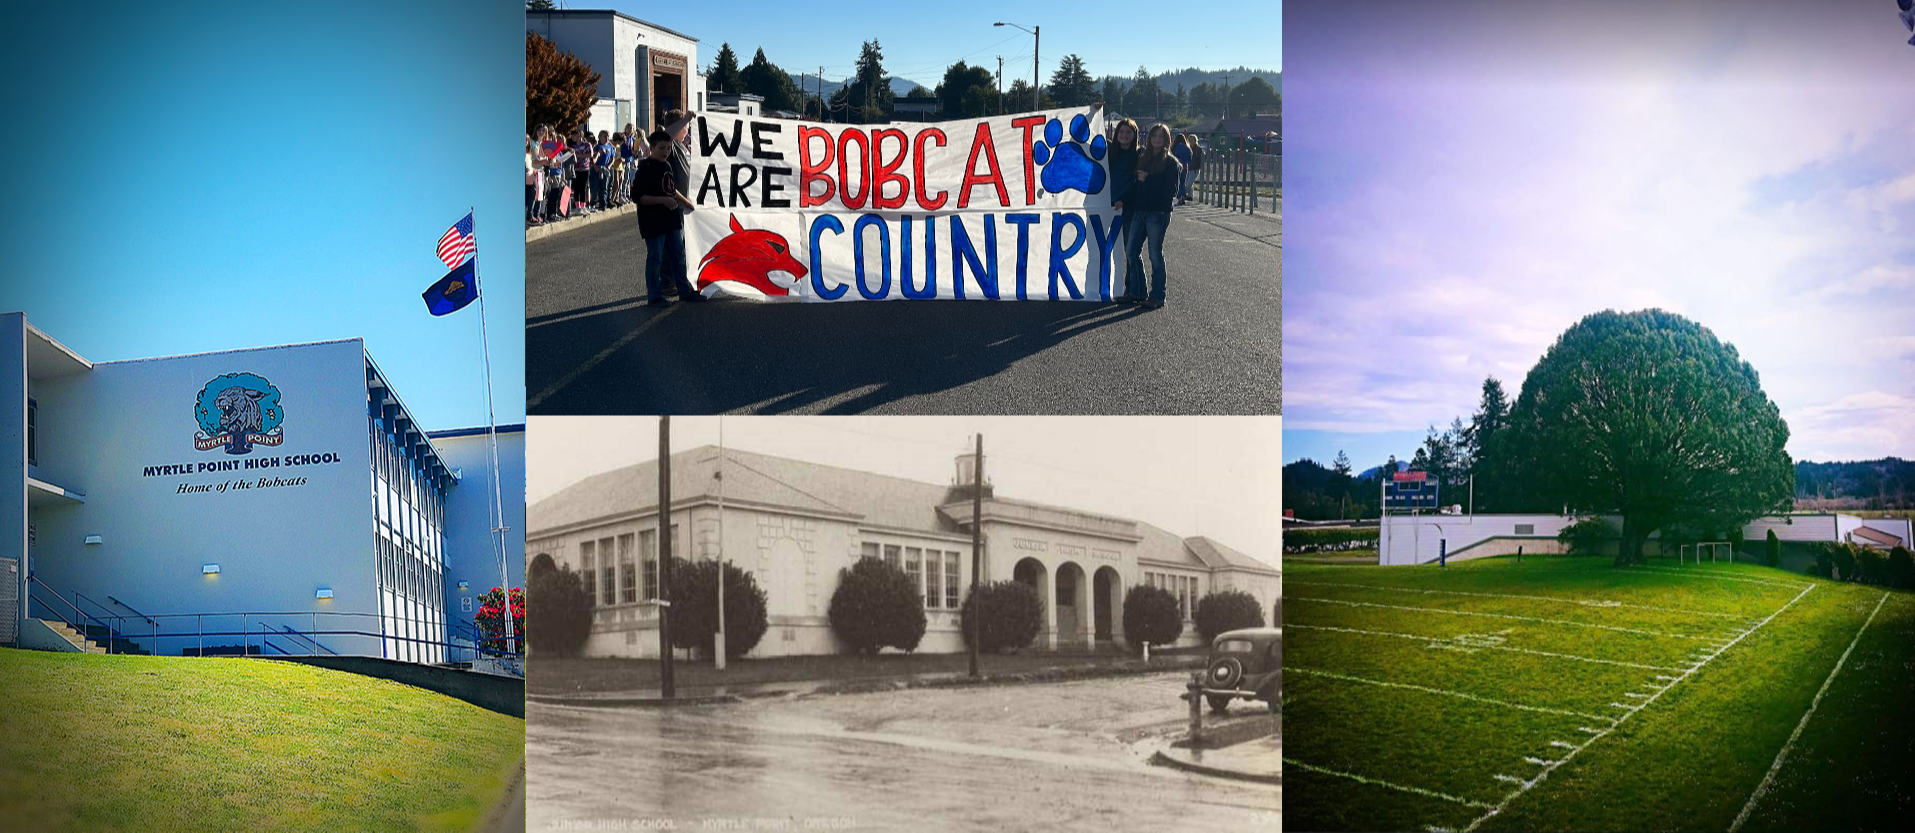 Buliding Collage  - Left image: Myrtle Point High School, Home of the Bobcats. Top Center Image: Students holding "We Are Bobcat Country" Banner. Bottom Center Image: Historic photo of Maple Hill school building:. Right Image: Football field and Myrtle Tree